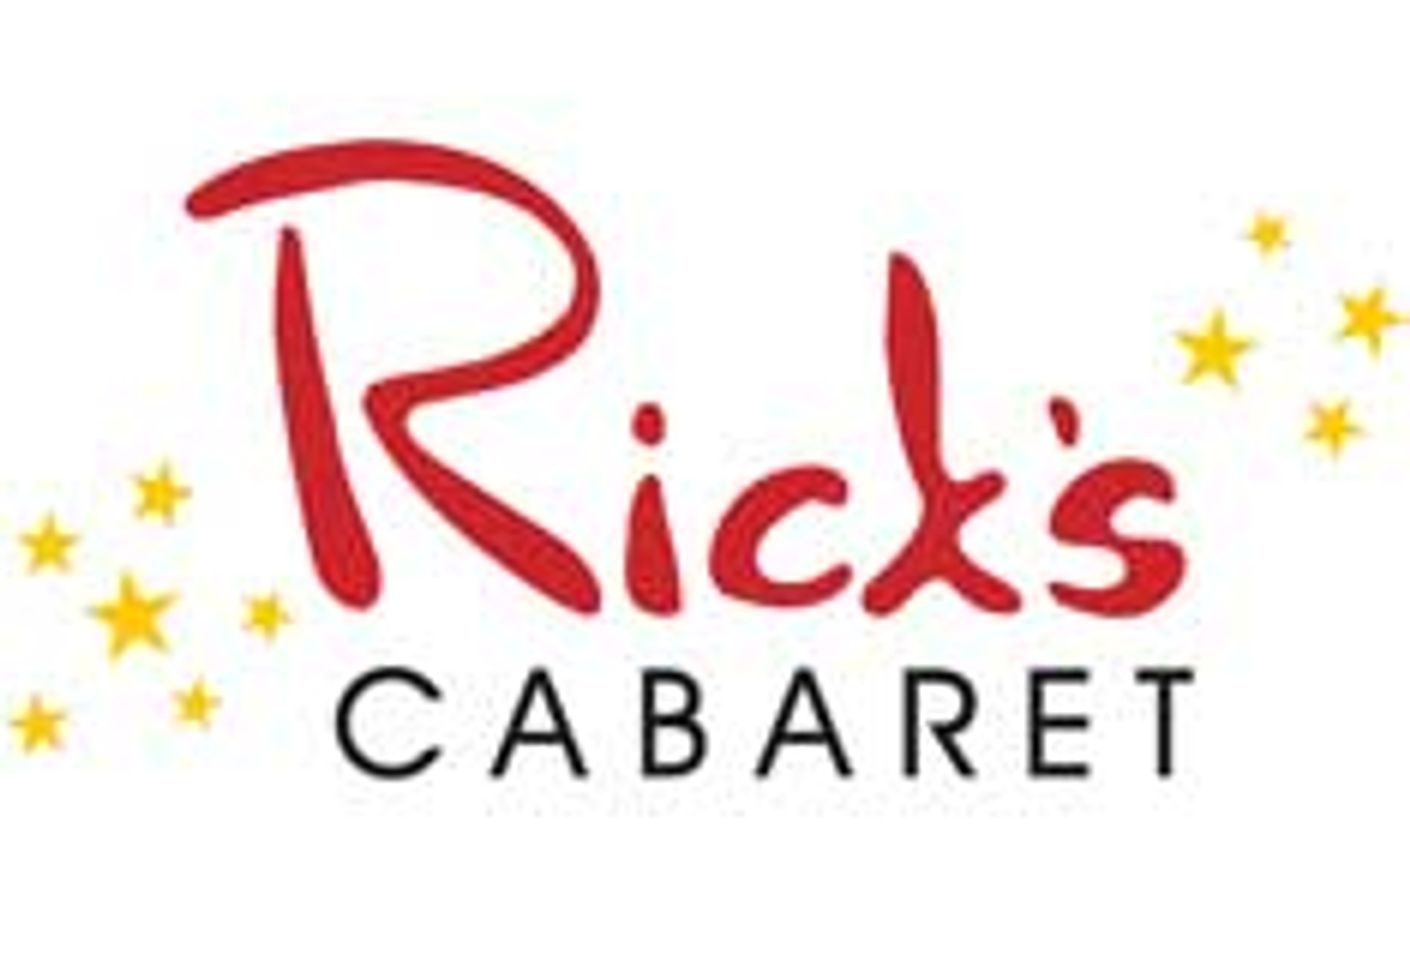 Rick’s Cabaret Reports Nearly 13 Percent Increase in Fourth Quarter